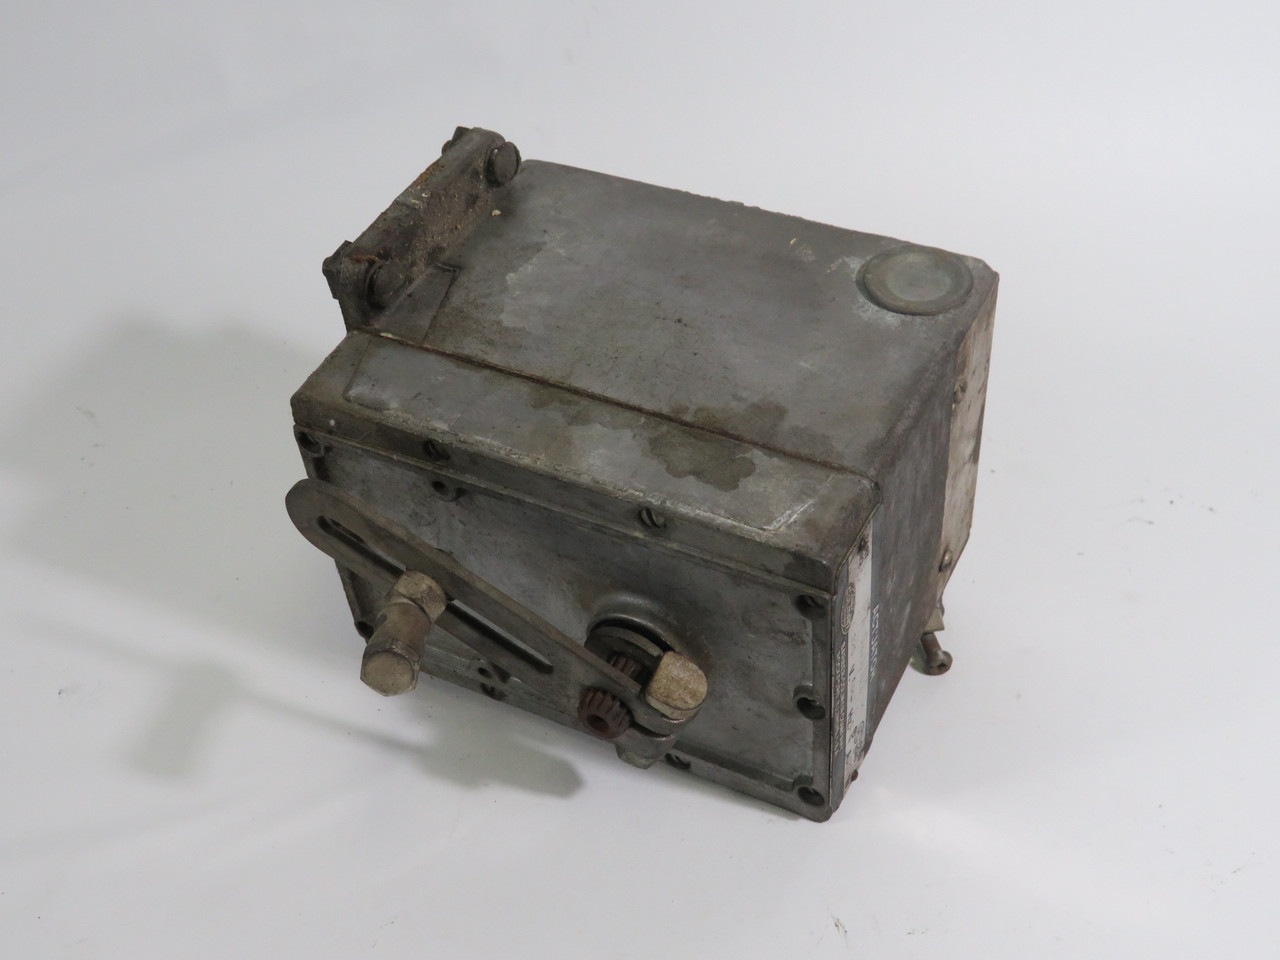 Barber-Colman MA-405-00-1 Actuator 120V 60HZ 0.4A 25W COSMETIC DAMAGE USED